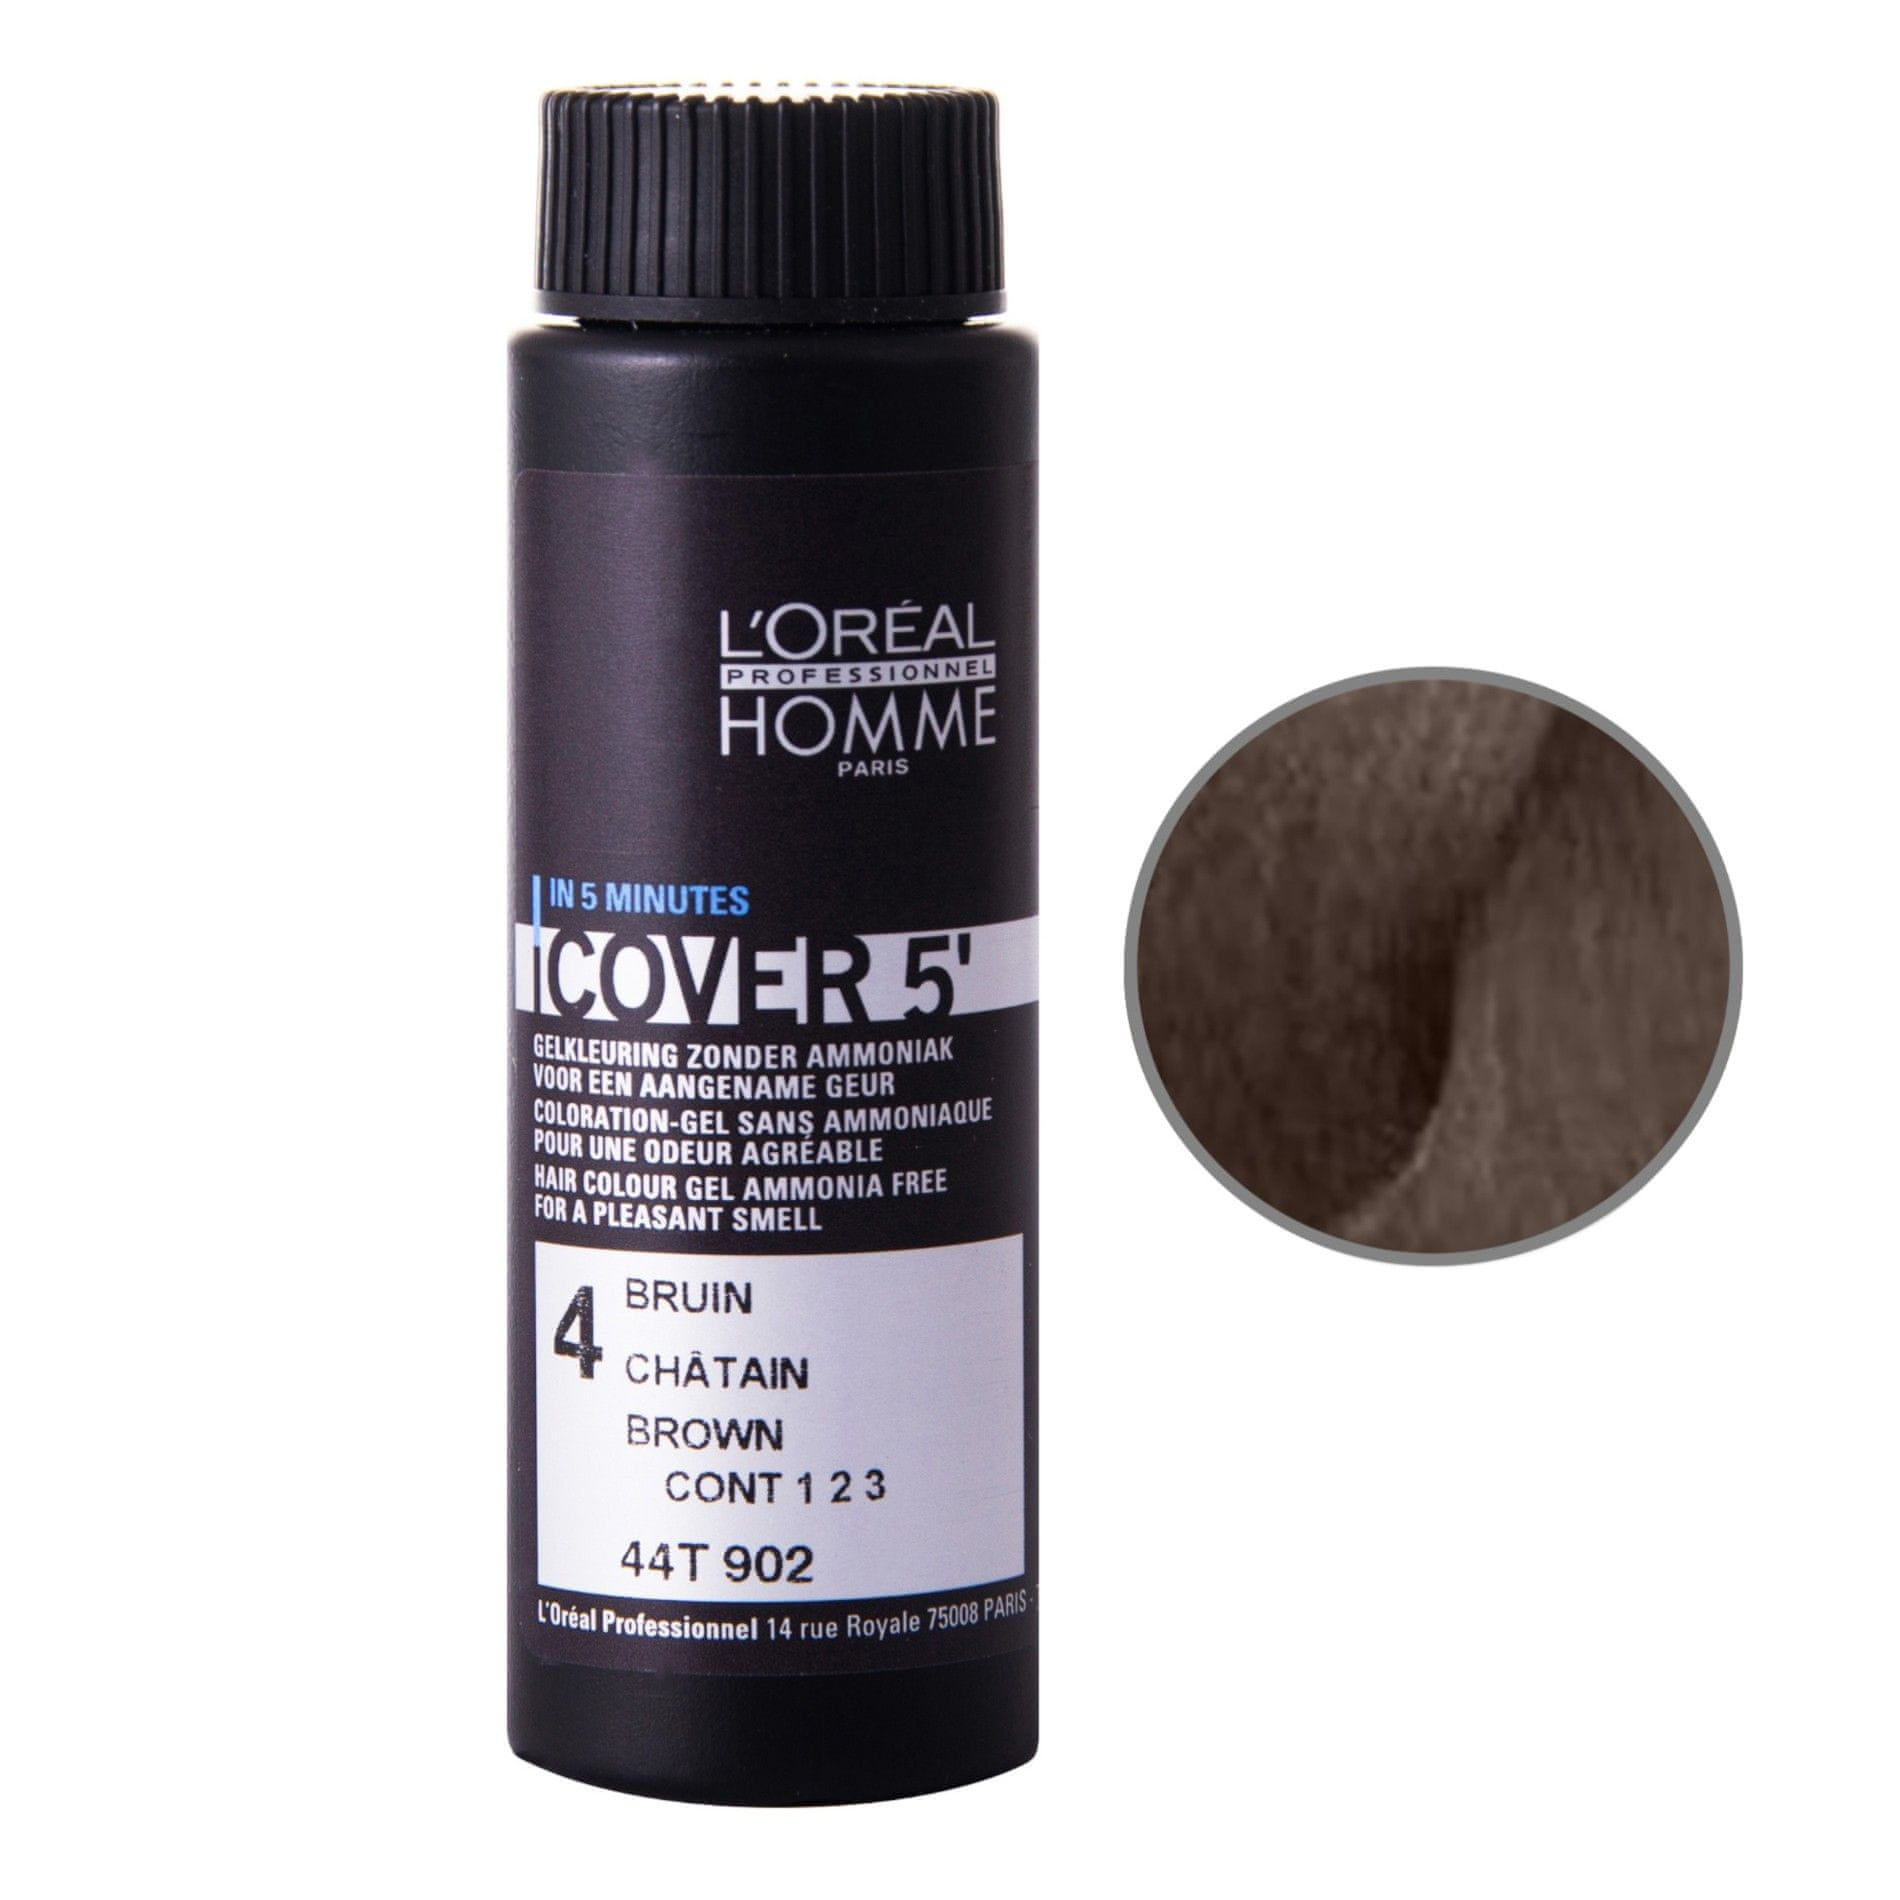 L'Oreal Professionnel homme Cover 5 №5. Loreal homme Cover 5. L'Oreal Professionnel homme краска-гель Cover 5. Cover 5 Loreal homme палитра. Loreal homme